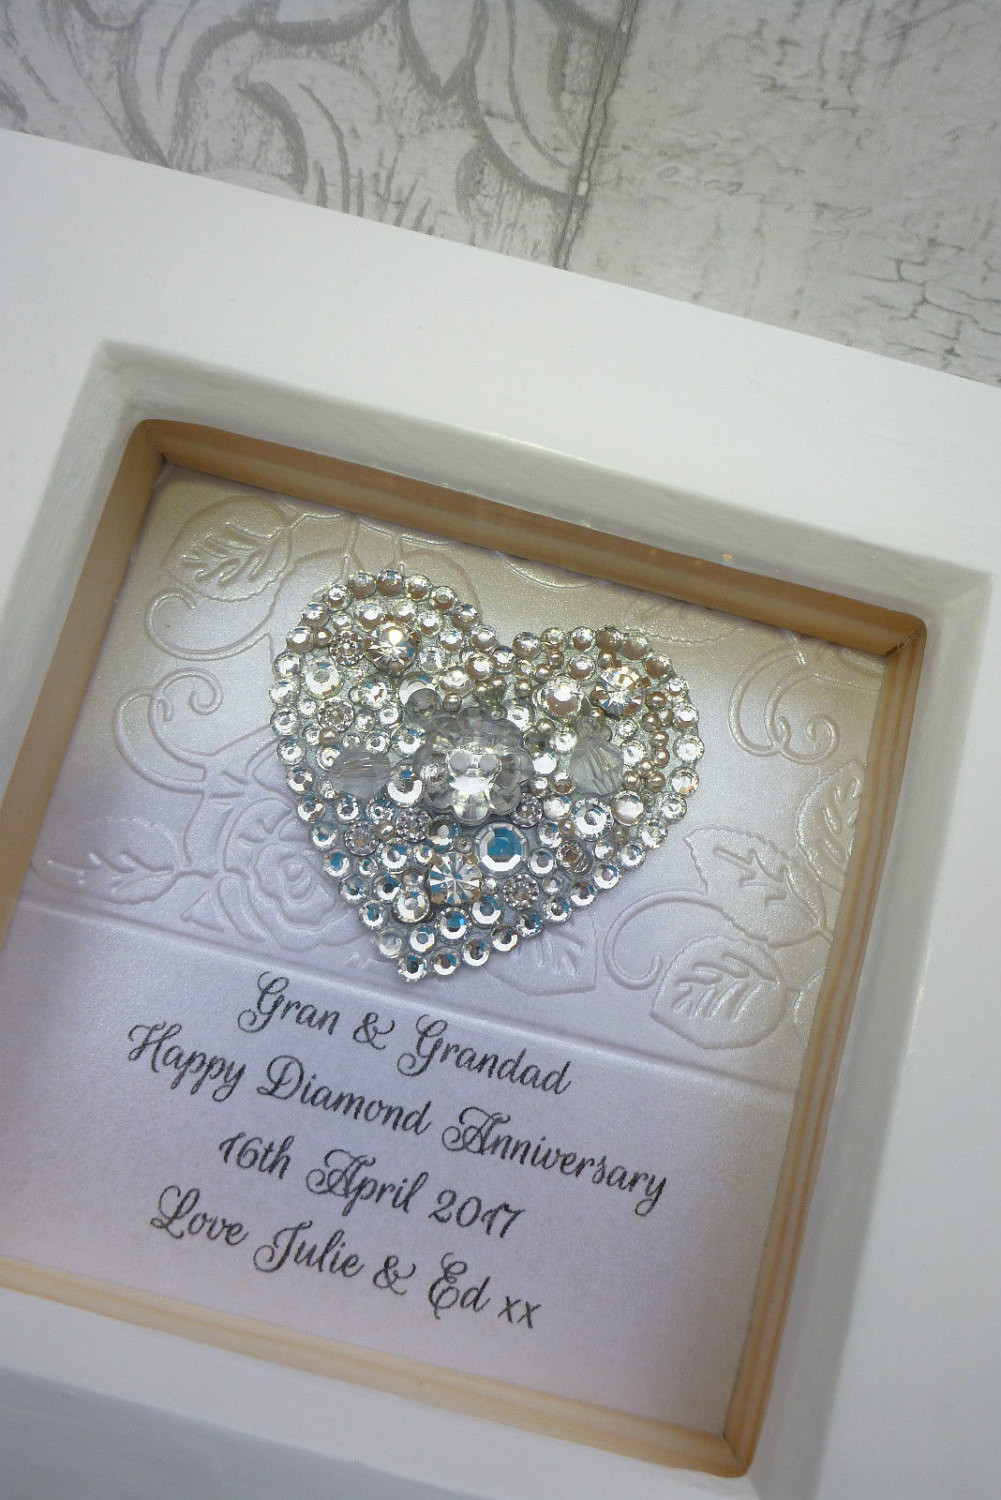 Gift Ideas For 15Th Wedding Anniversary
 60th anniversary t 15th wedding anniversary t Crystal